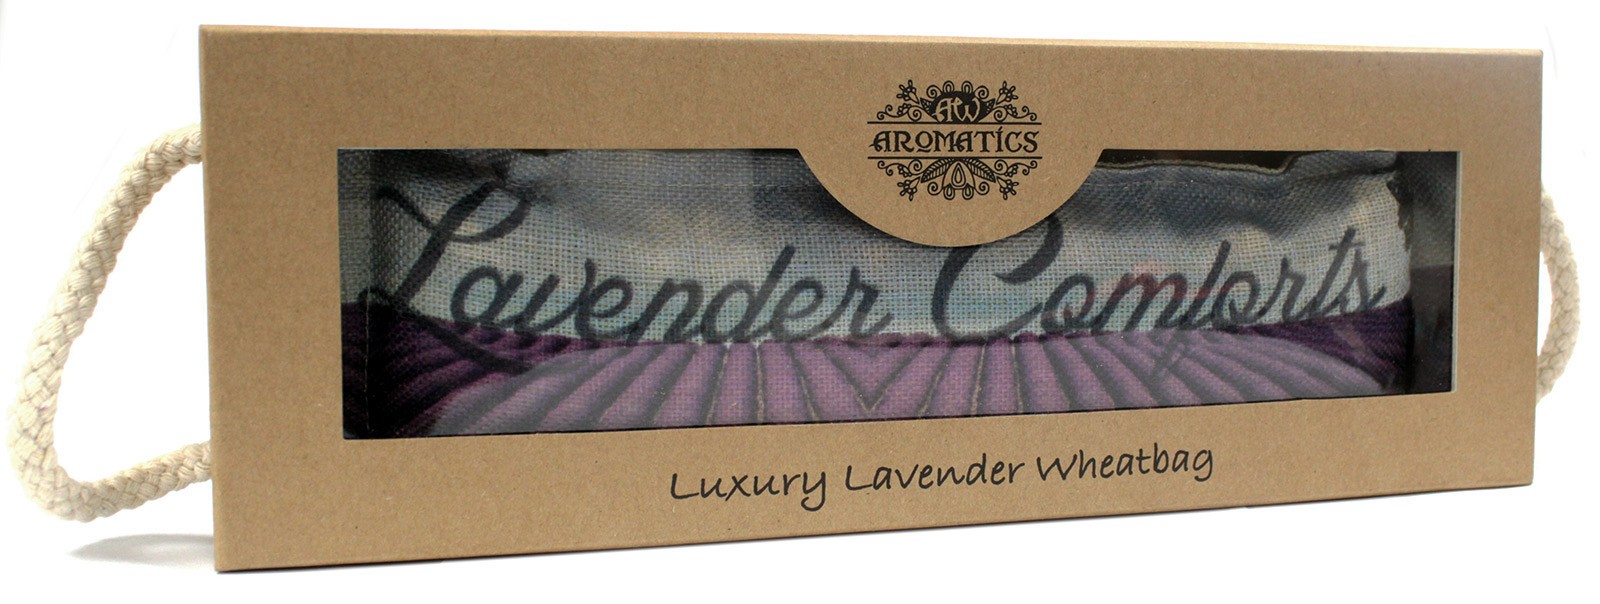 Luxury Lavender Wheat Bag in Gift Box -  Lavender Comforts